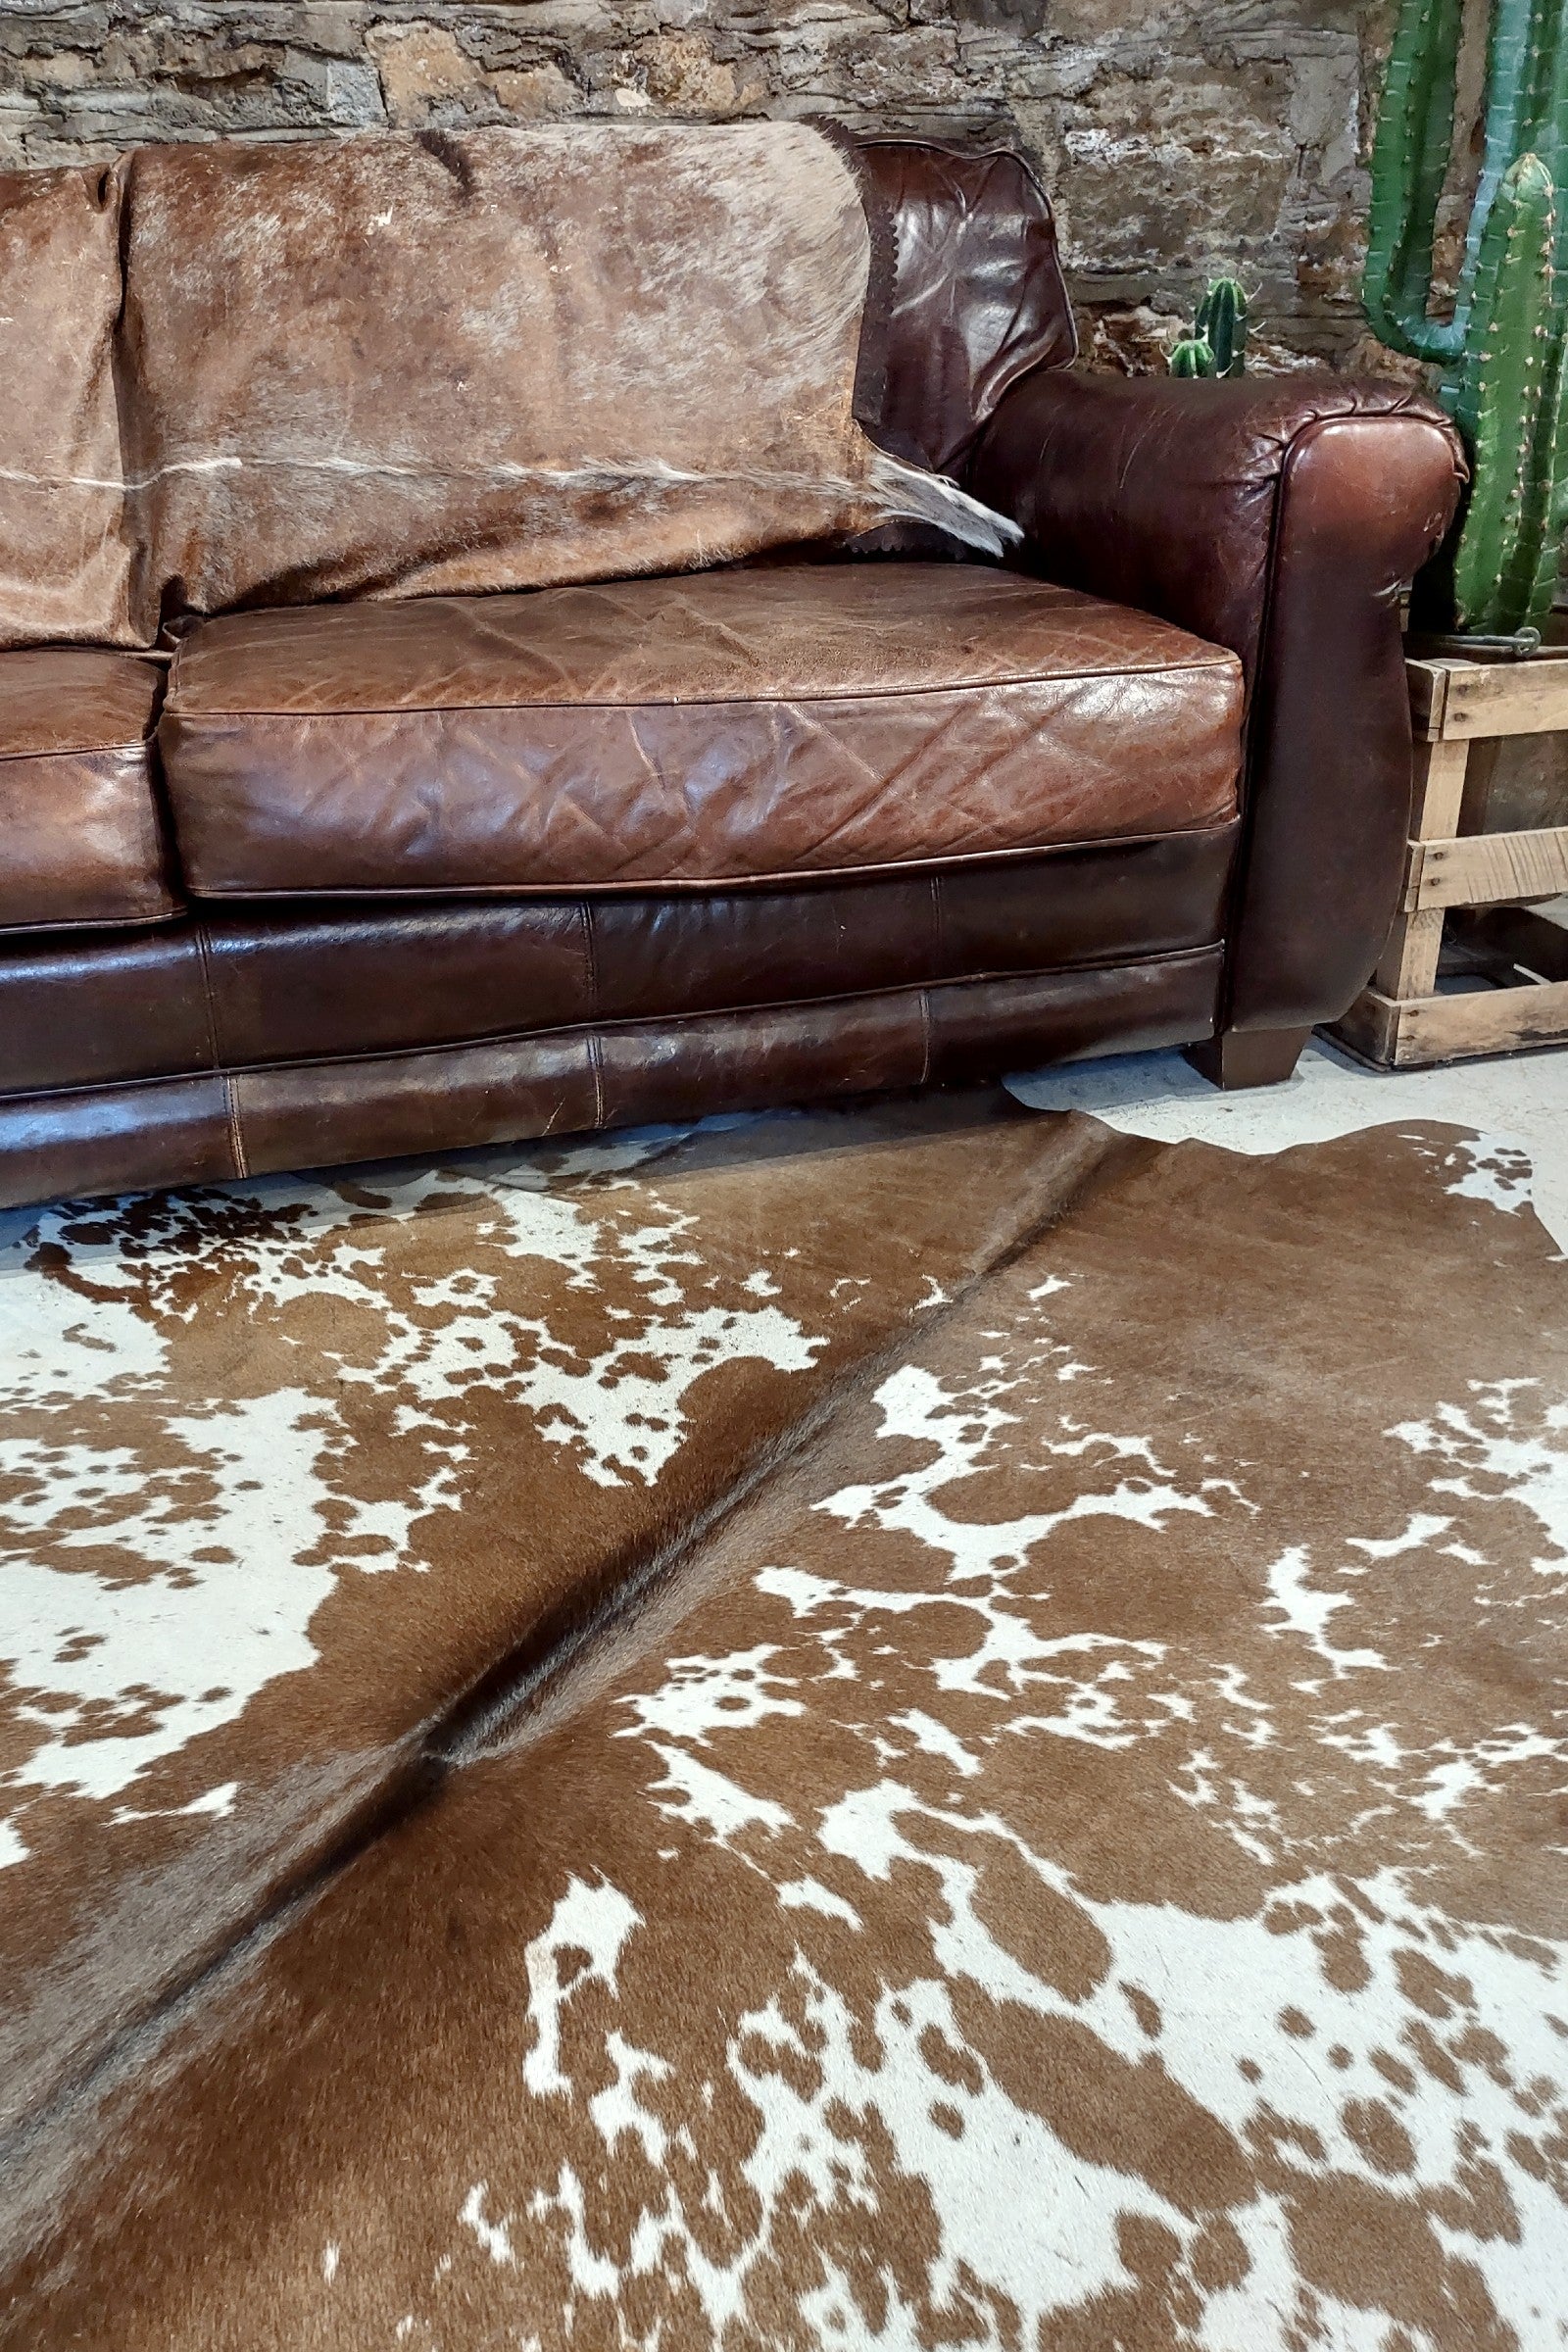 Brown & White Spotted Cowhide Rug #2970